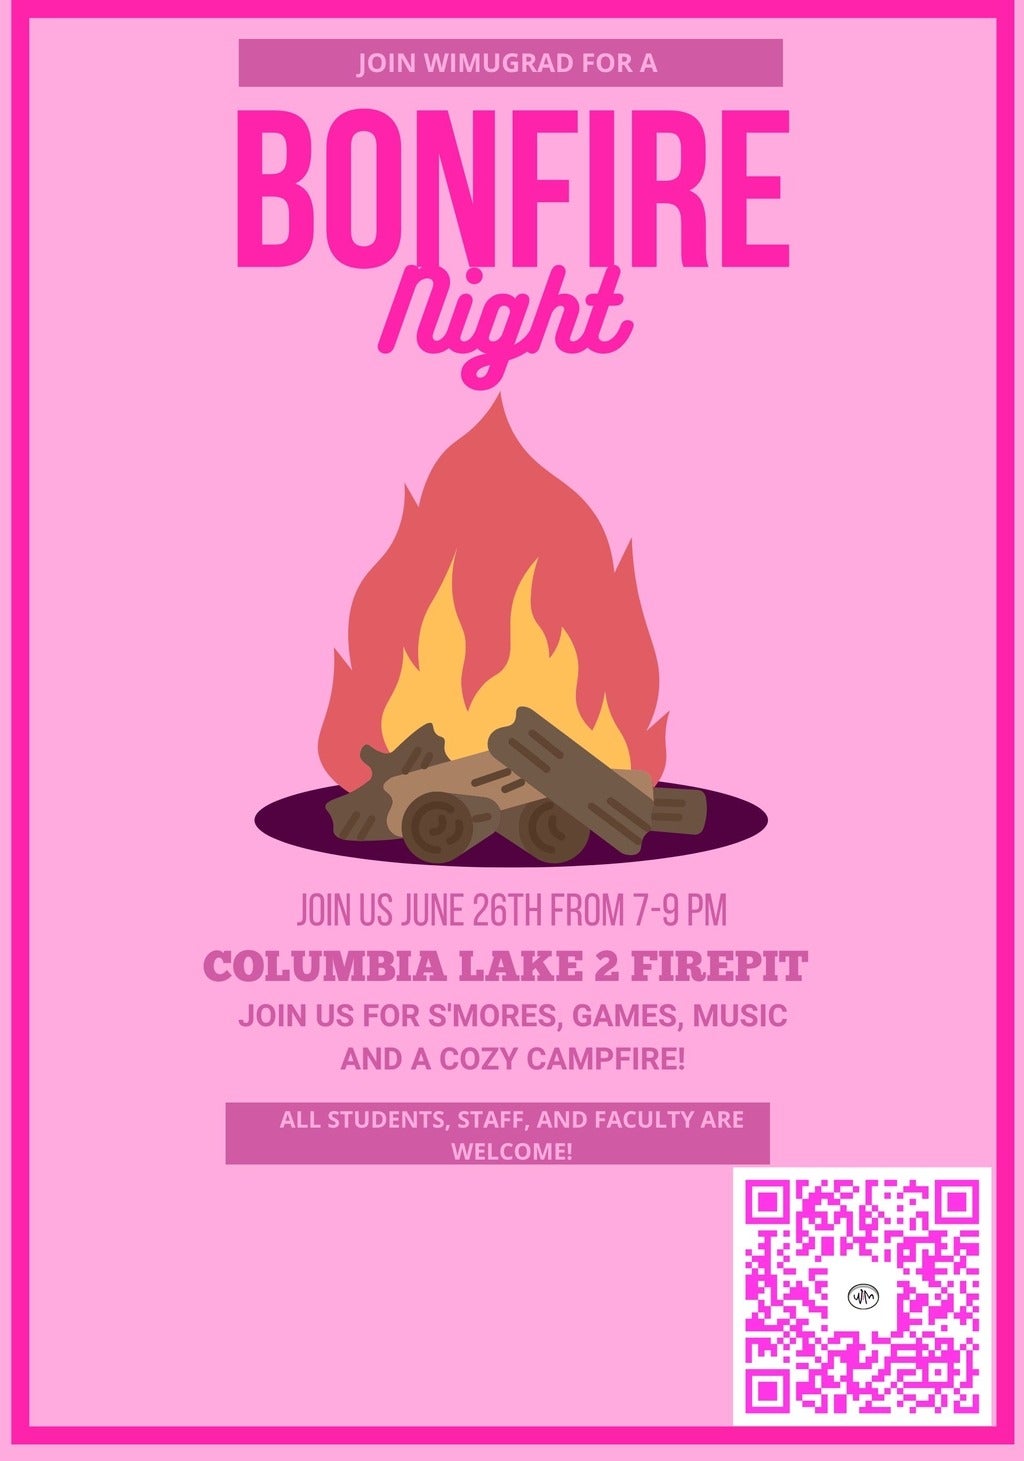 Poster for bonfire night on June 26th. It will be from 7-9 p.m at Columbia Lake 2 Firepit. Enjoy some S'mores, games, music!